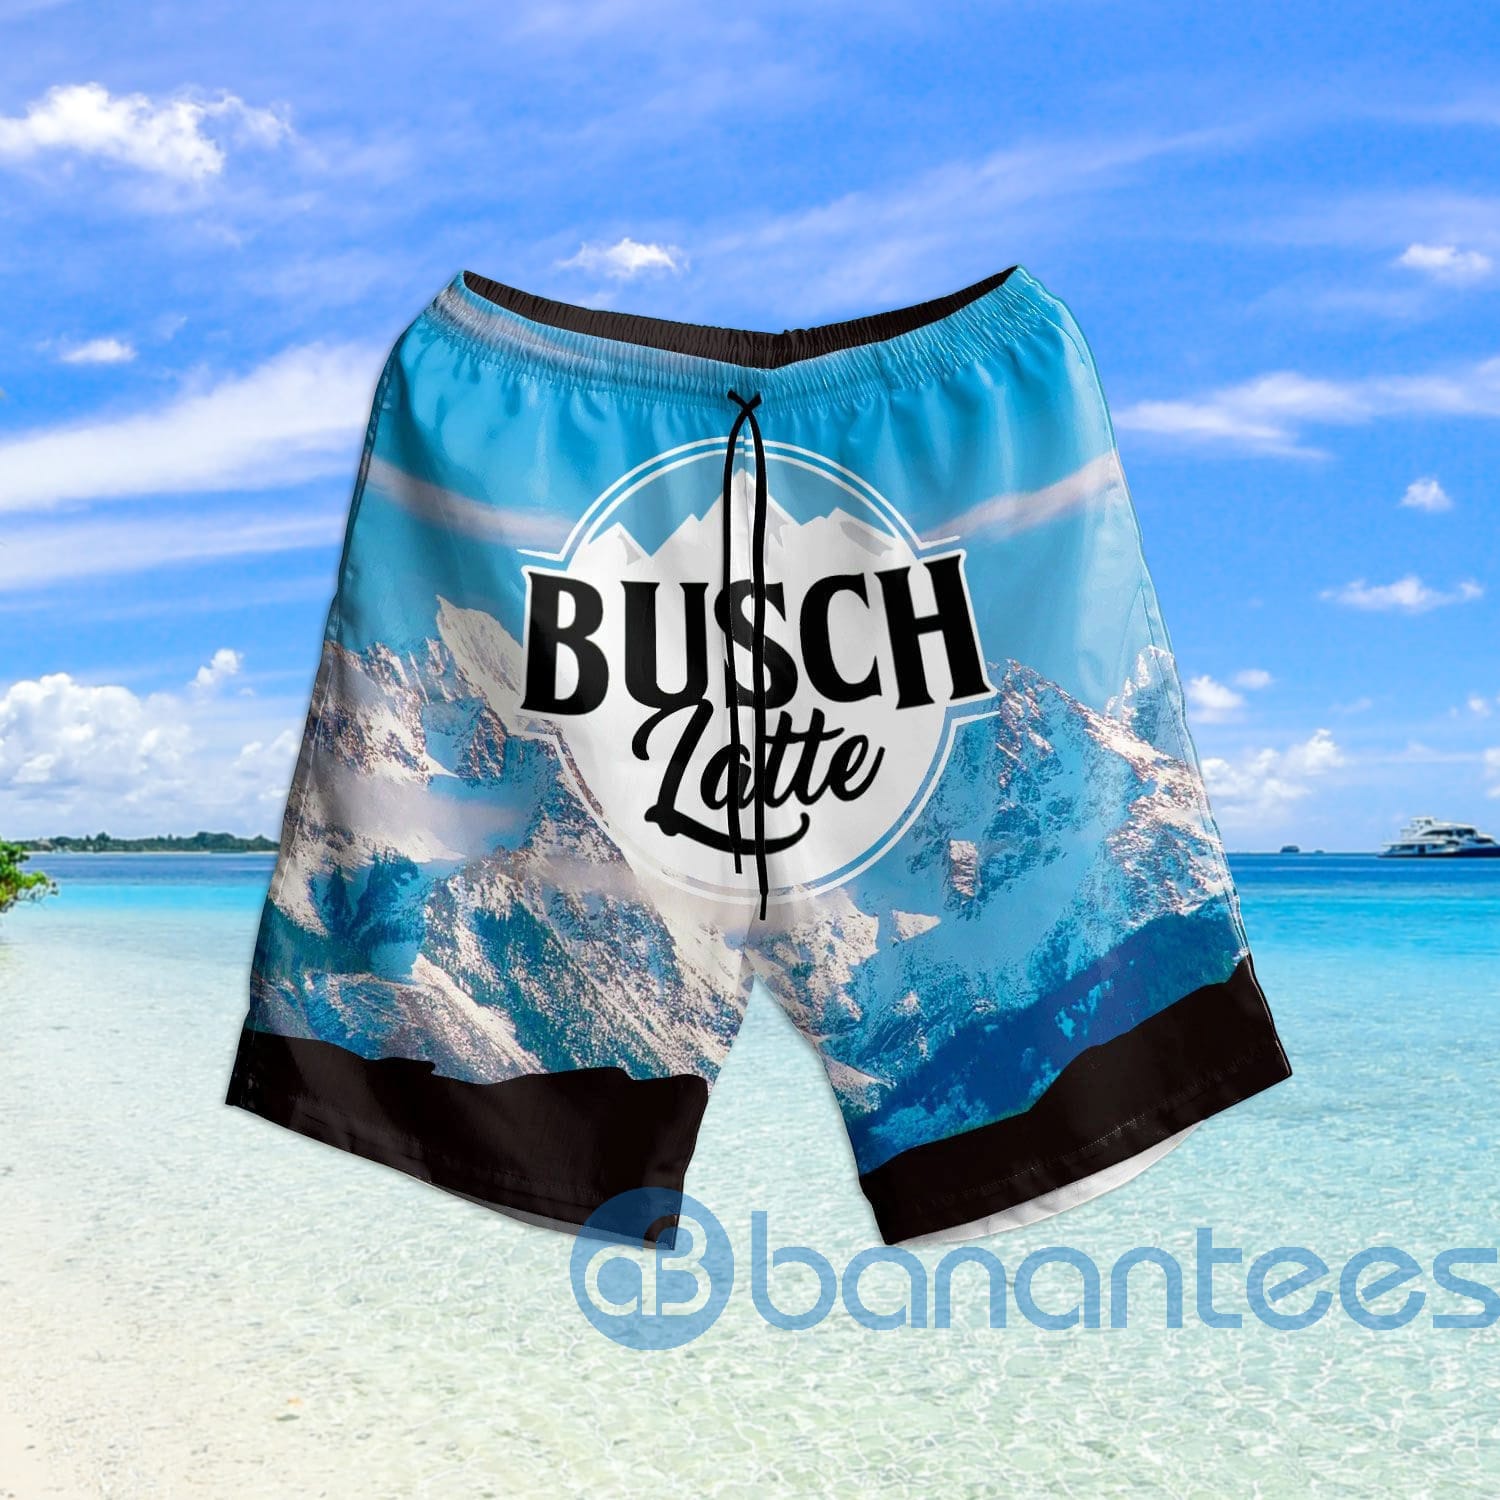 Busch Latte Ice Beach Shorts Beer Lovers Father Day Gift